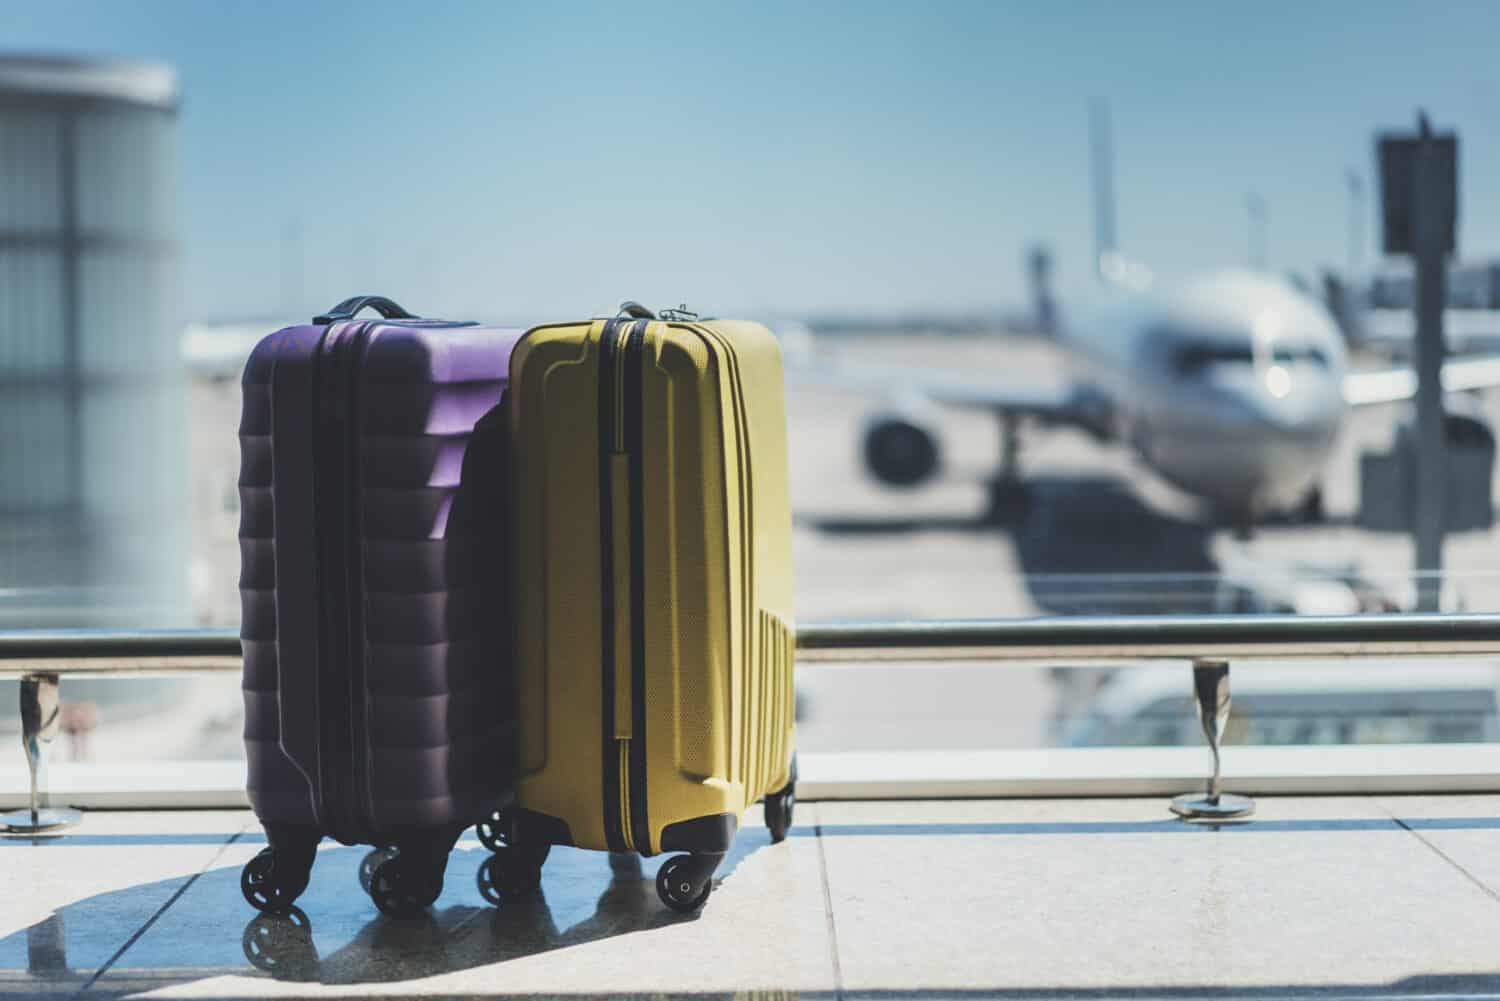 <ul> <li><strong>Estimated budget flight cost:</strong> $500 – $1,000</li> </ul> <p>Finding affordable flights is key to budgeting a Malta trip. Plenty of budget flights are available, but it may take some looking around. Flights are typically at least $500 during the shoulder seasons (spring and fall). If you fly during a more popular time, expect to spend closer to $1,000 or even more!</p> <p>If you live within driving distance of a few different cities, consider comparing flight prices from a few different airports. Often, prices can differ depending on where you're coming from.</p> <p>Agree with this? Hit the Thumbs Up button above. Disagree? Let us know in the comments with what you'd change.</p>